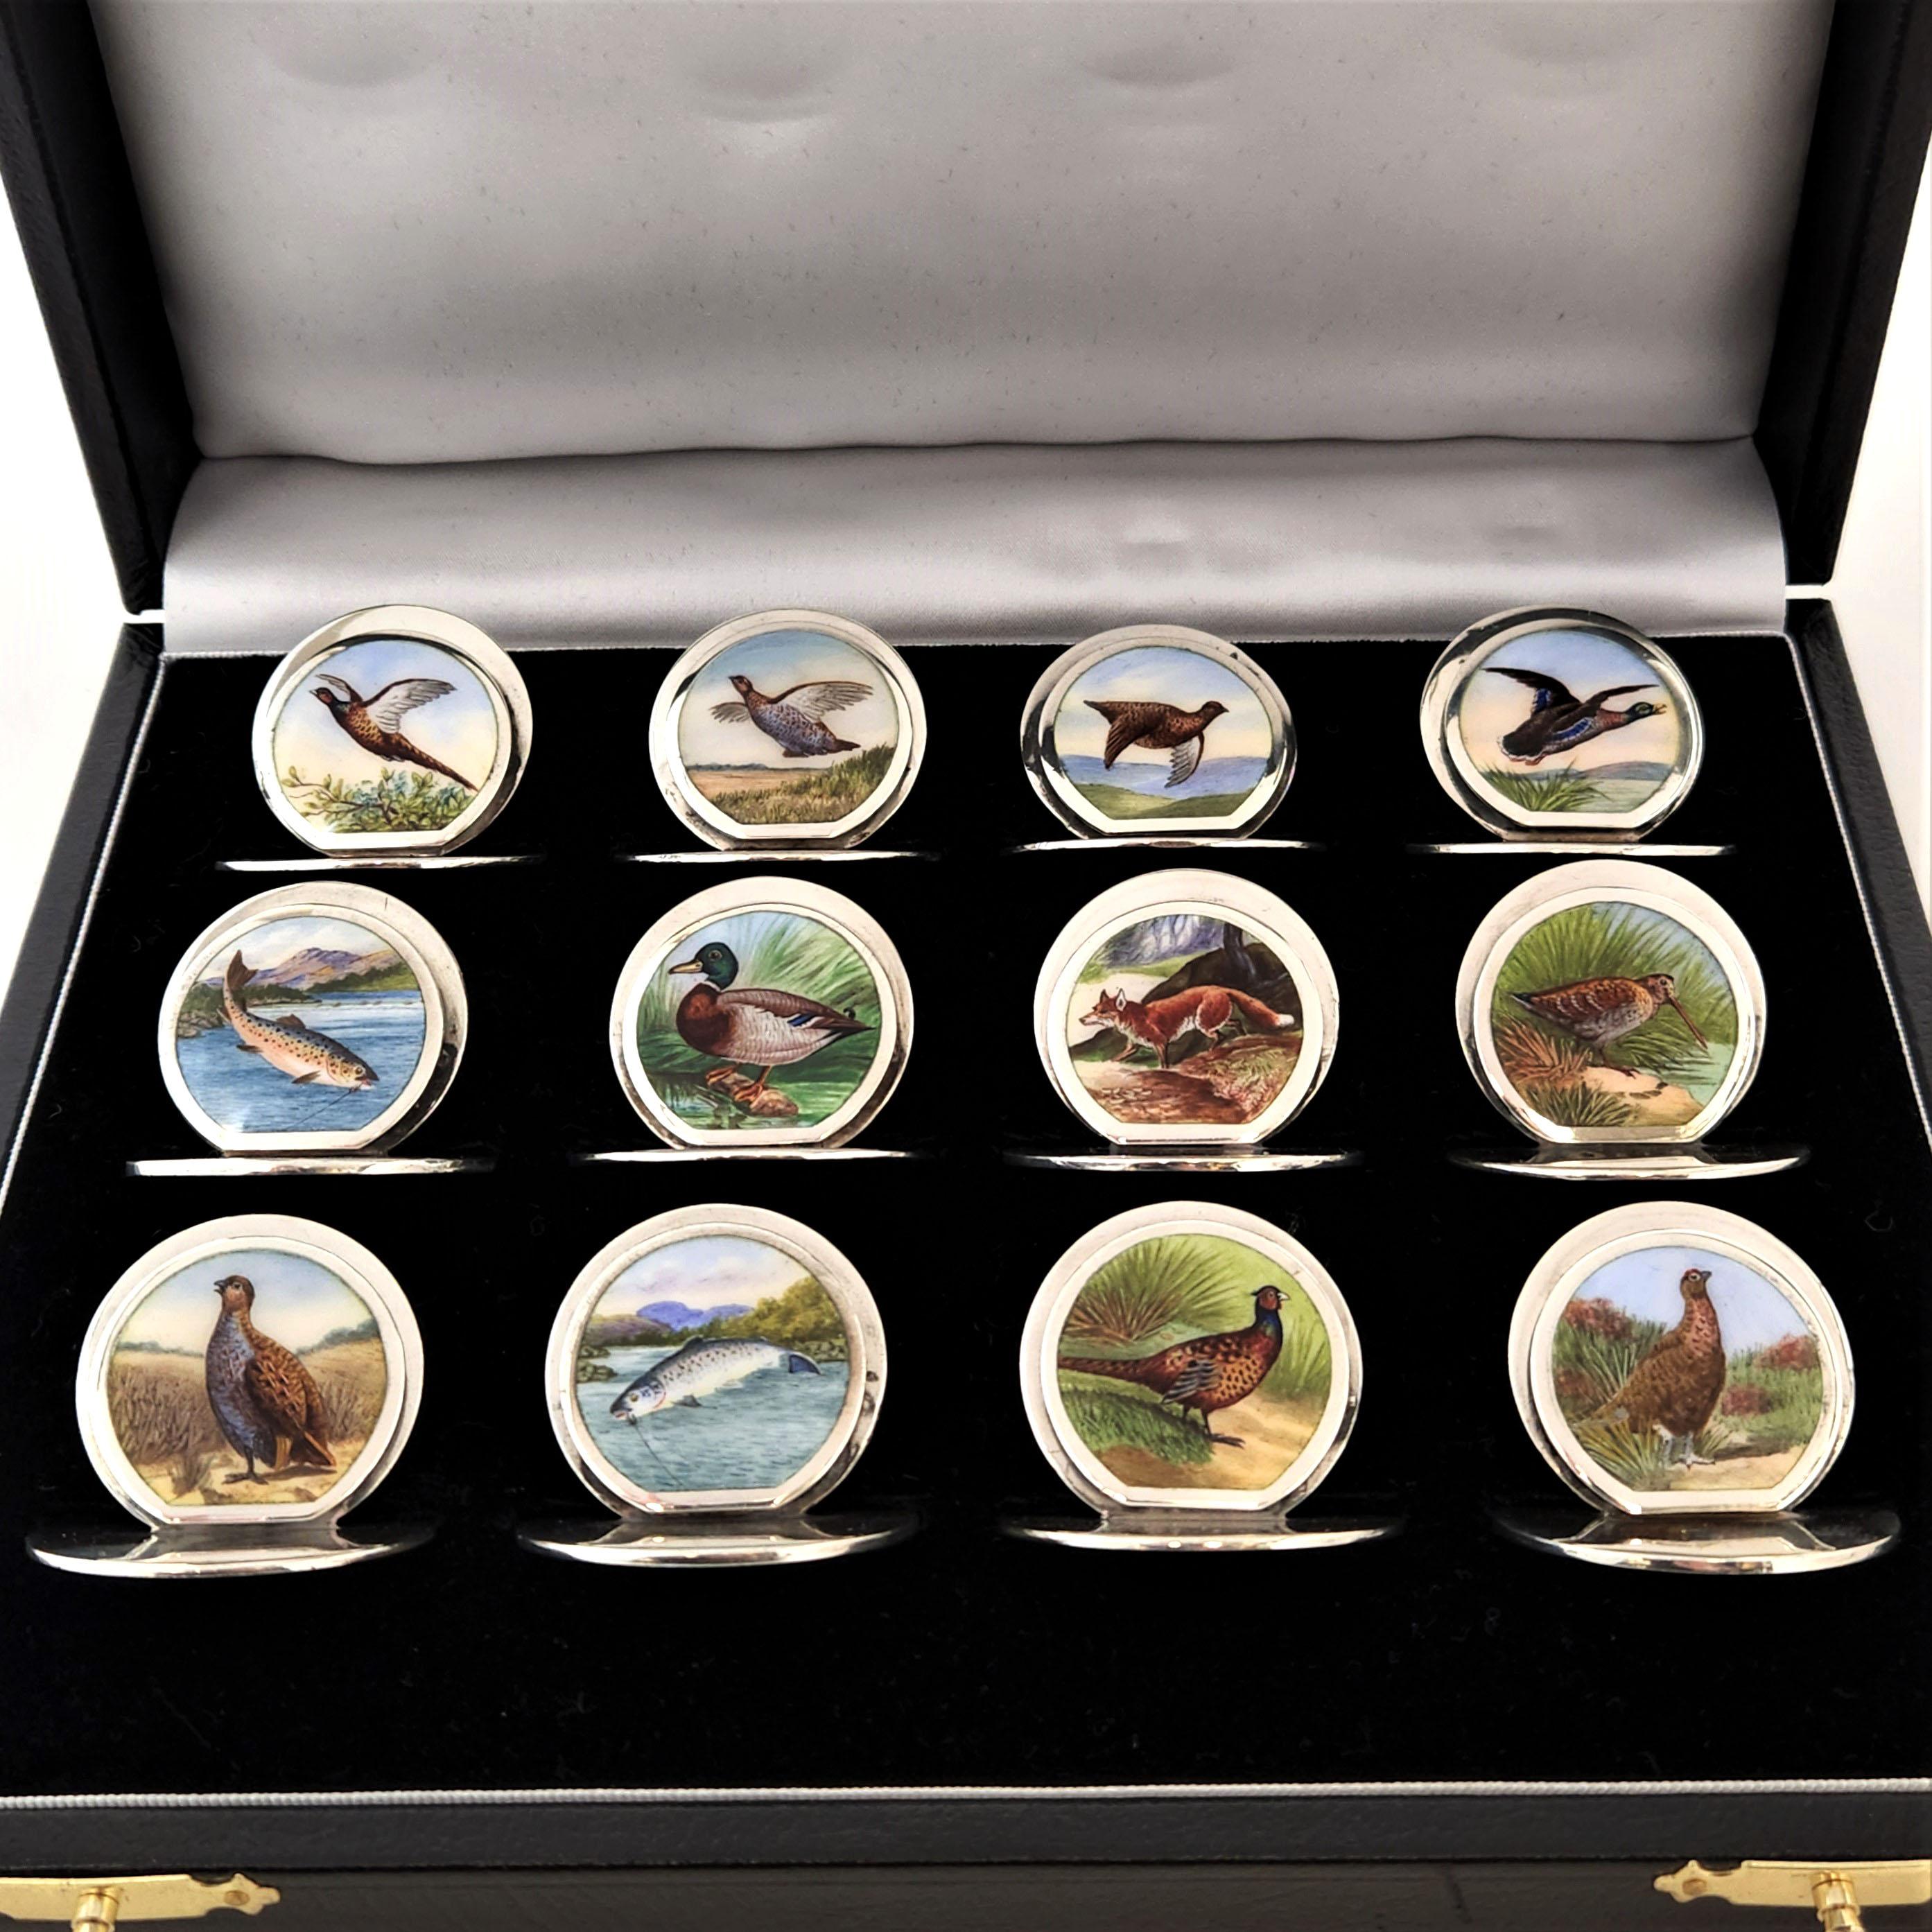 A rare Set of 12 Antique solid Silver & Enamel Place Card Holders / Menu Holders in a black leather fitted case. This set is unusual in that each Name Card Holder has a unique, individual design showing an array of game birds including pheasants,